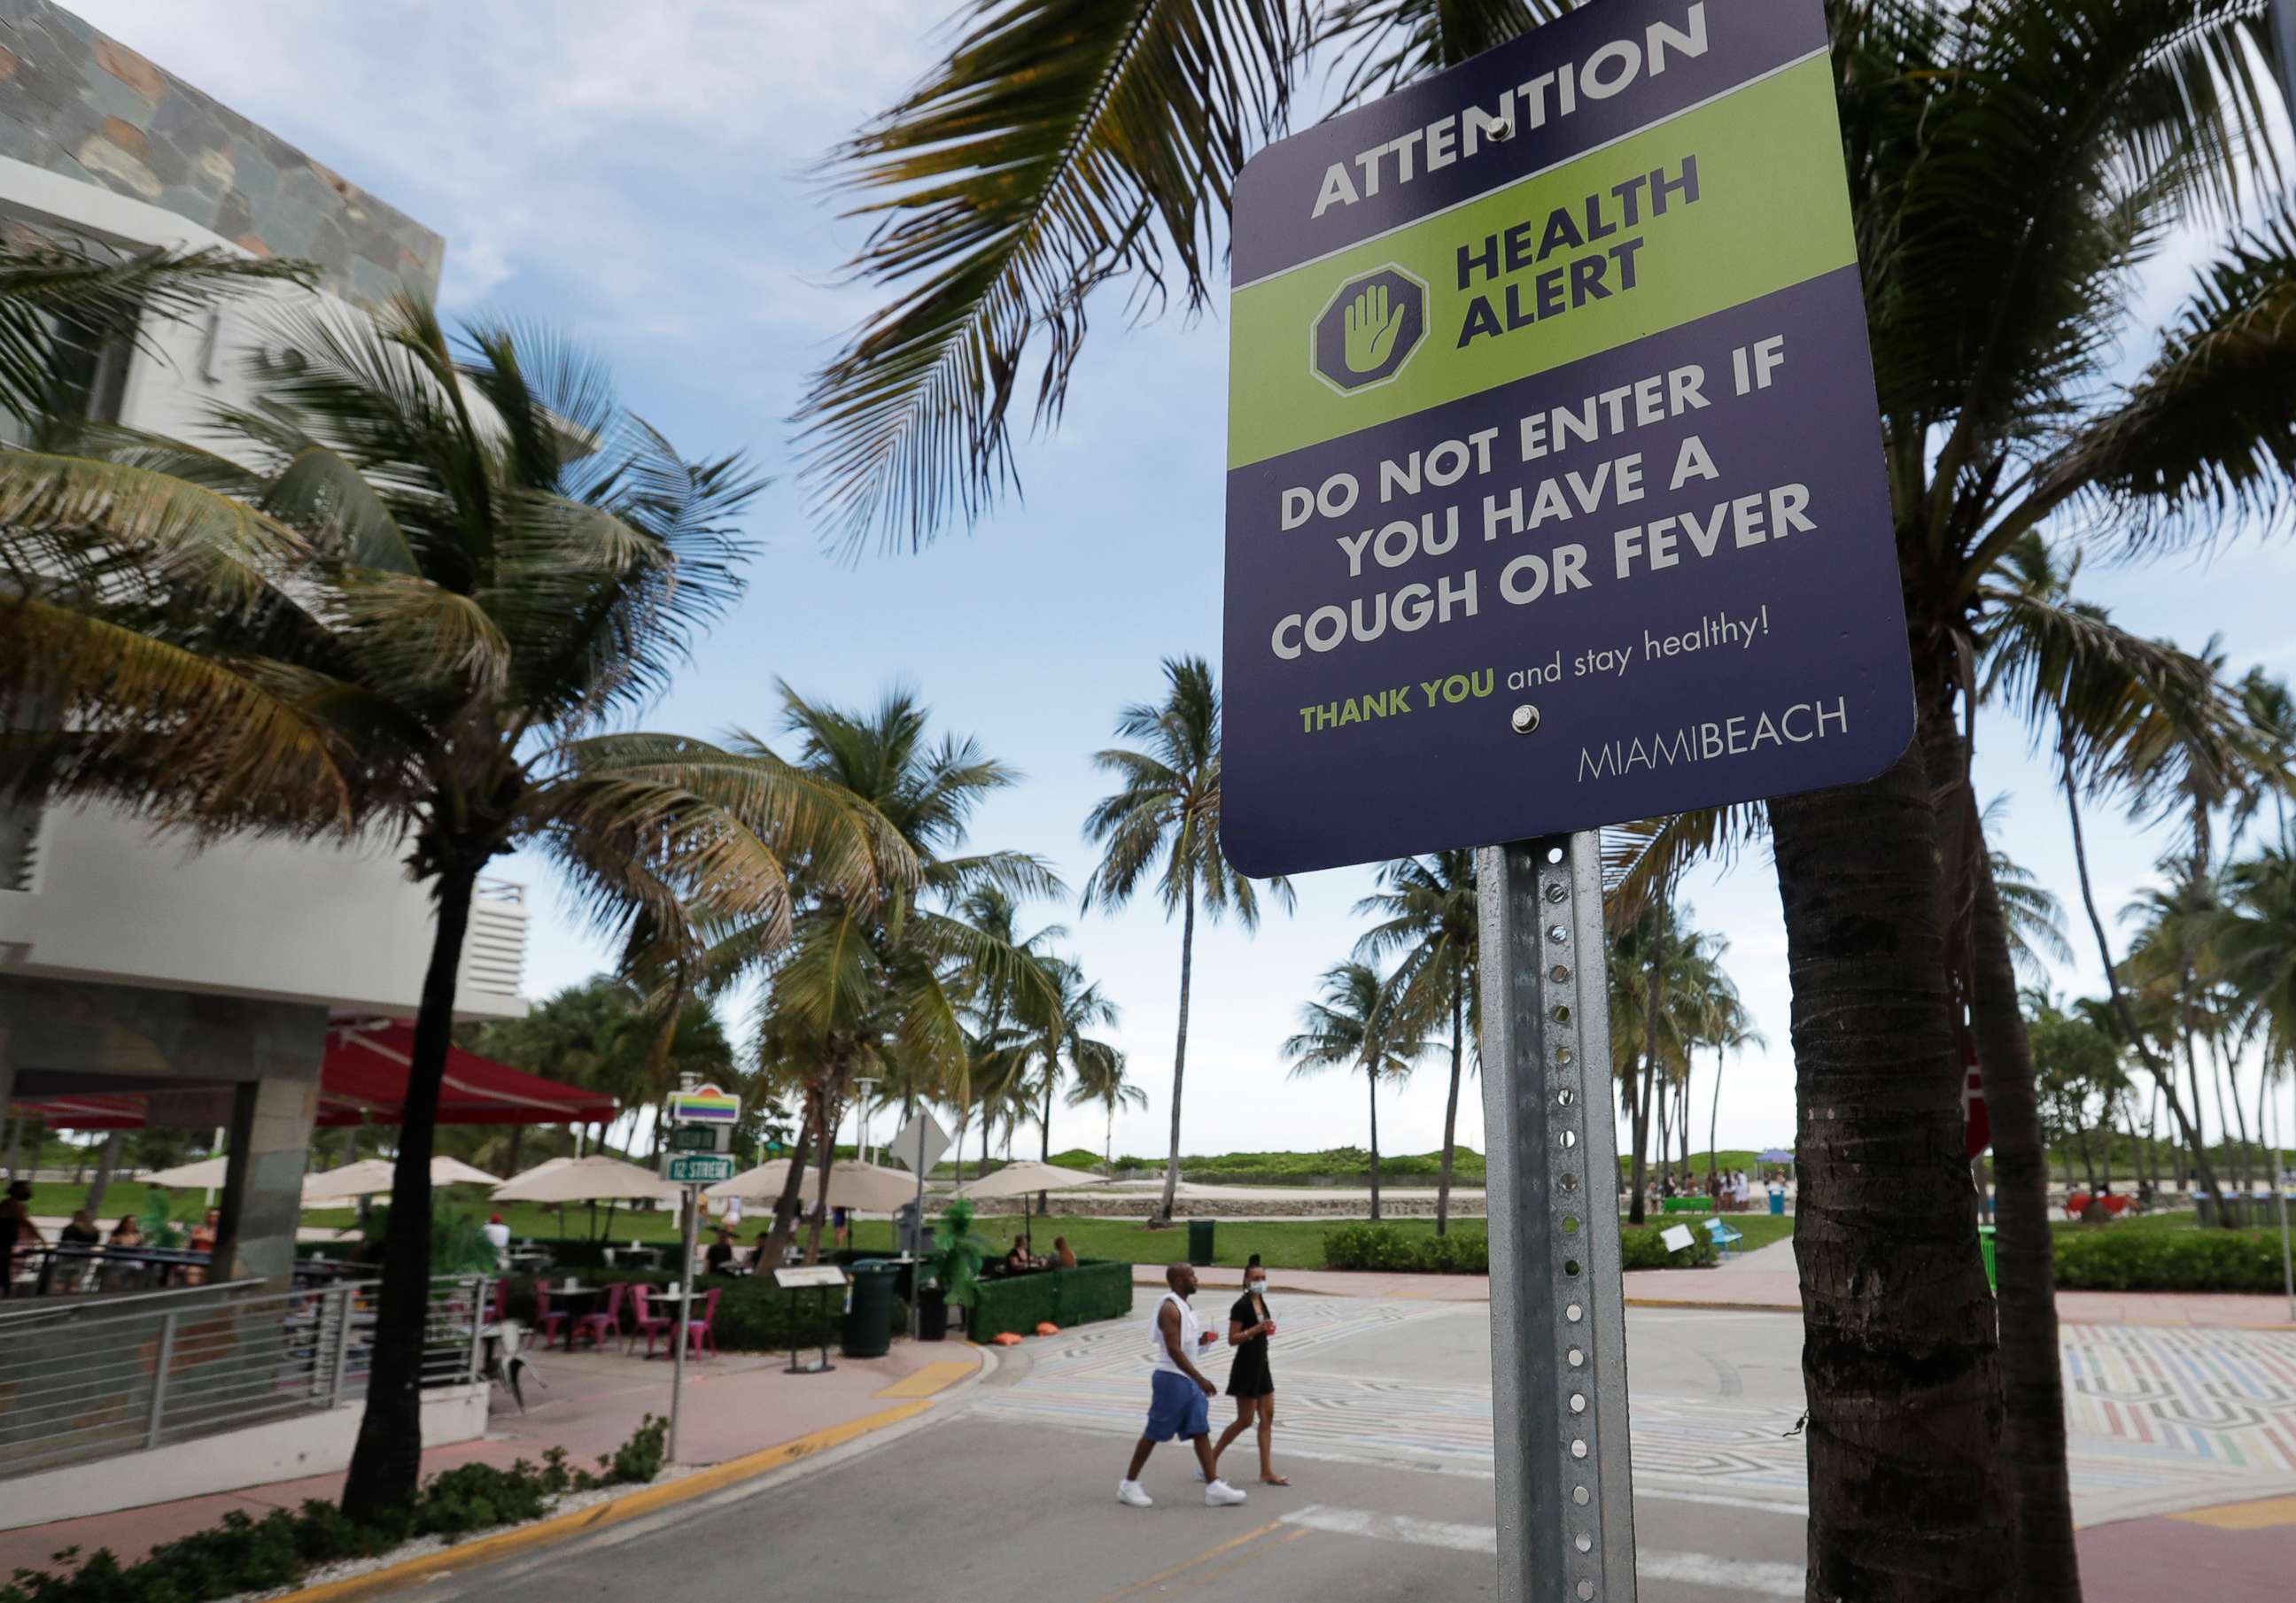 PHOTO: A couple walks past a sign asking people not to visit Miami Beach, Florida's famed South Beach if they have a cough or fever, June 22, 2020.